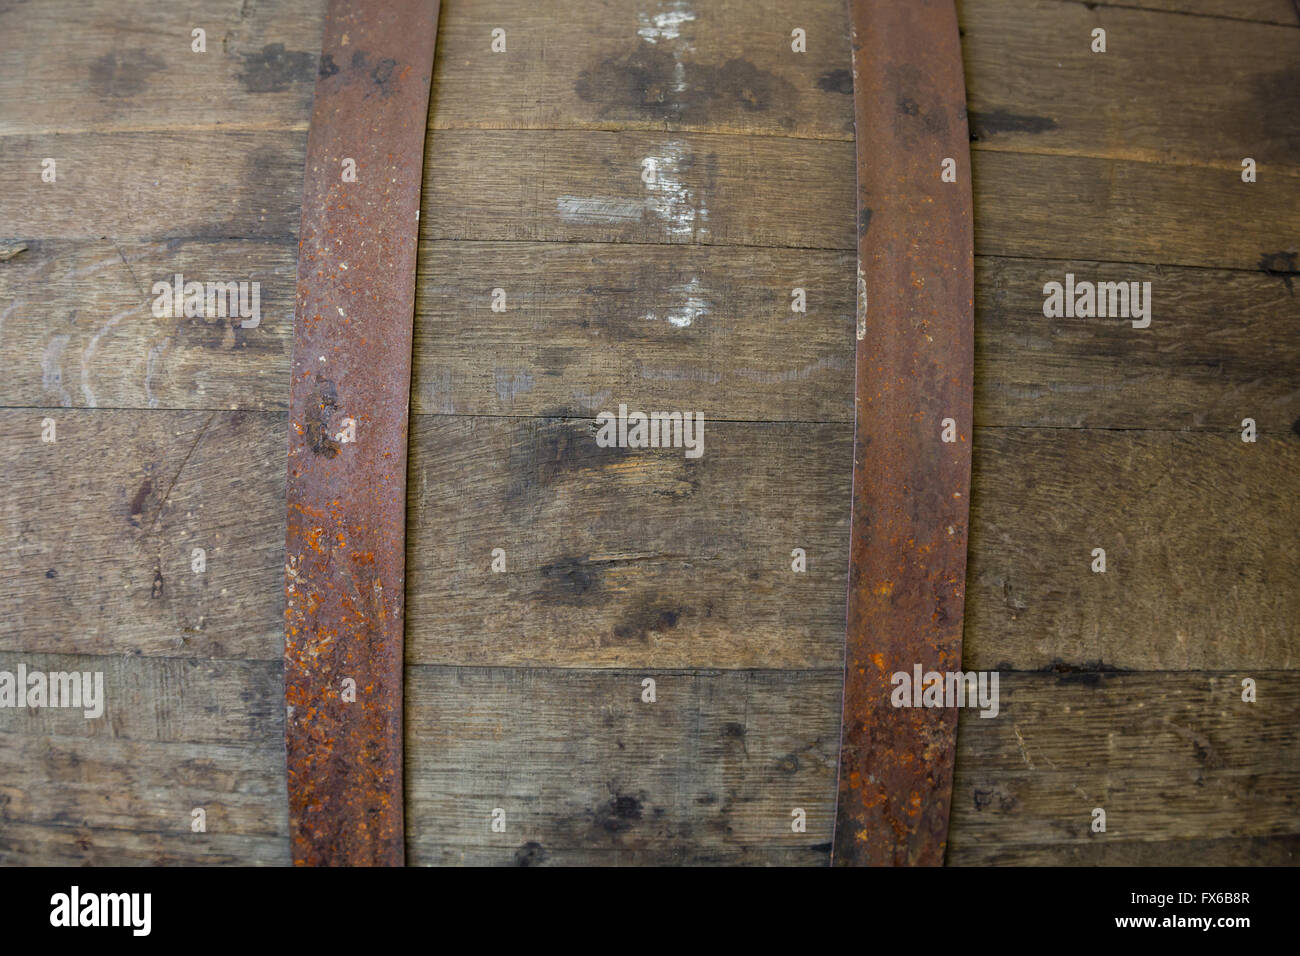 Bourbon barrel at a brewery with aged beer inside. Stock Photo